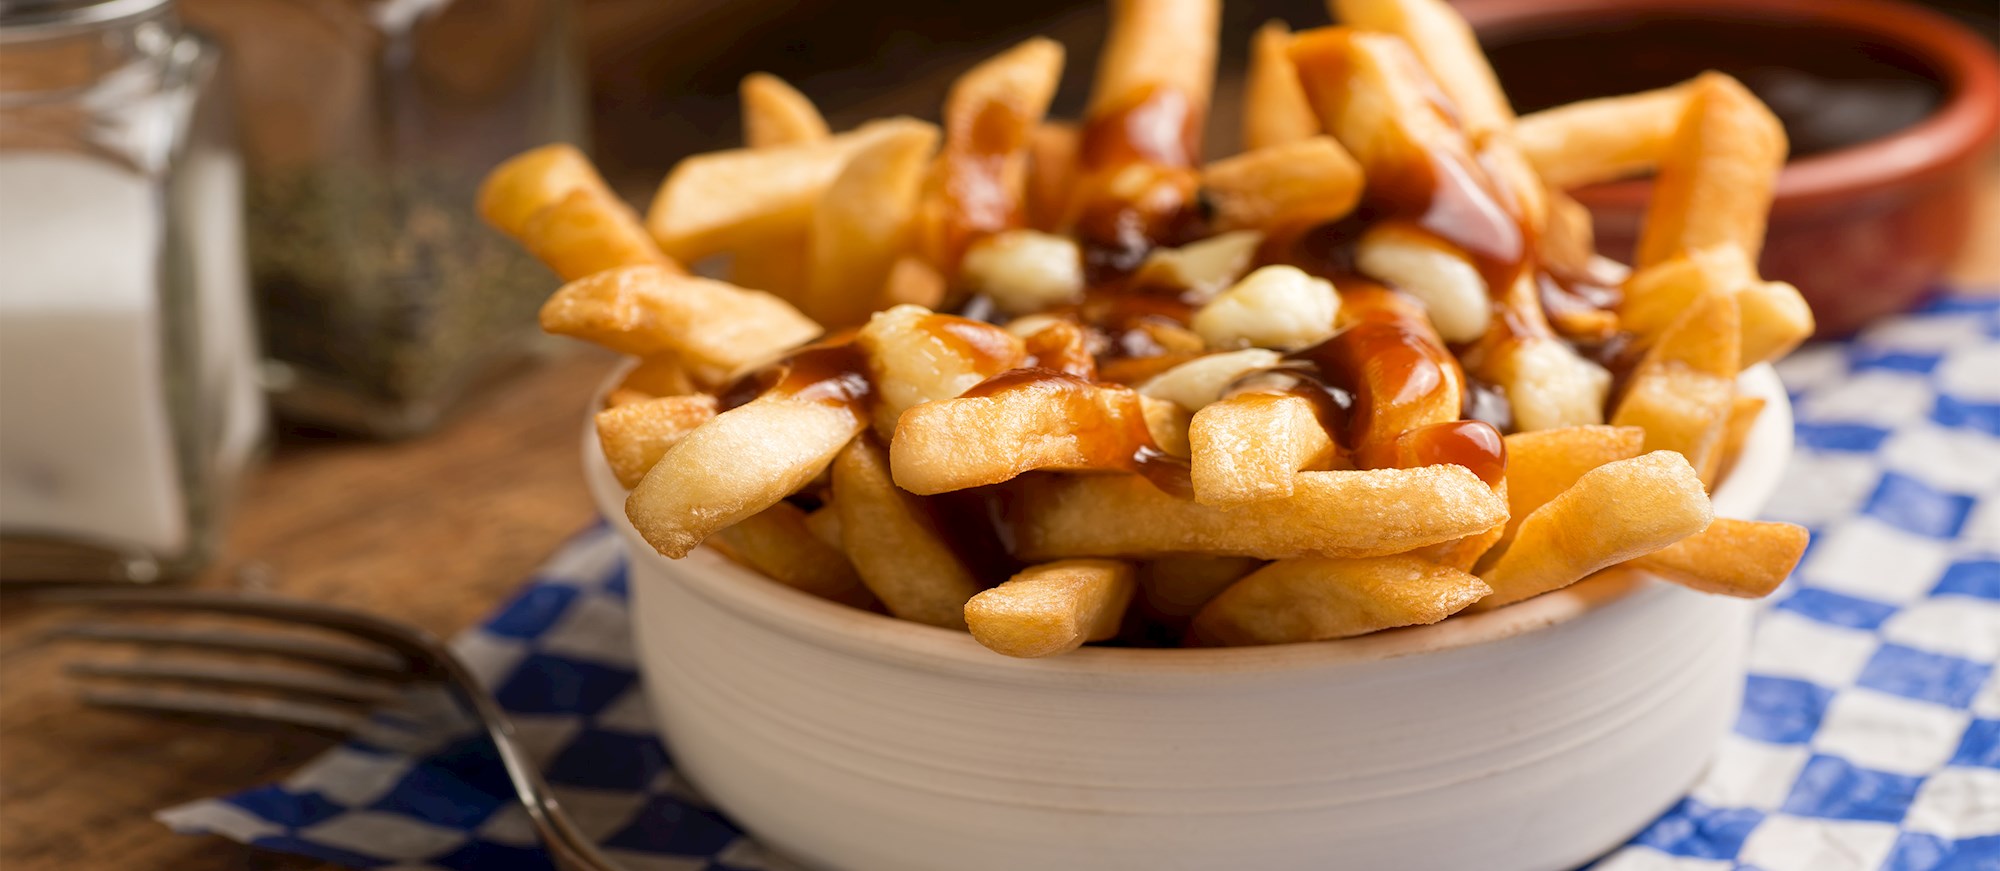 Where to Eat the Best Poutine in the World? | TasteAtlas